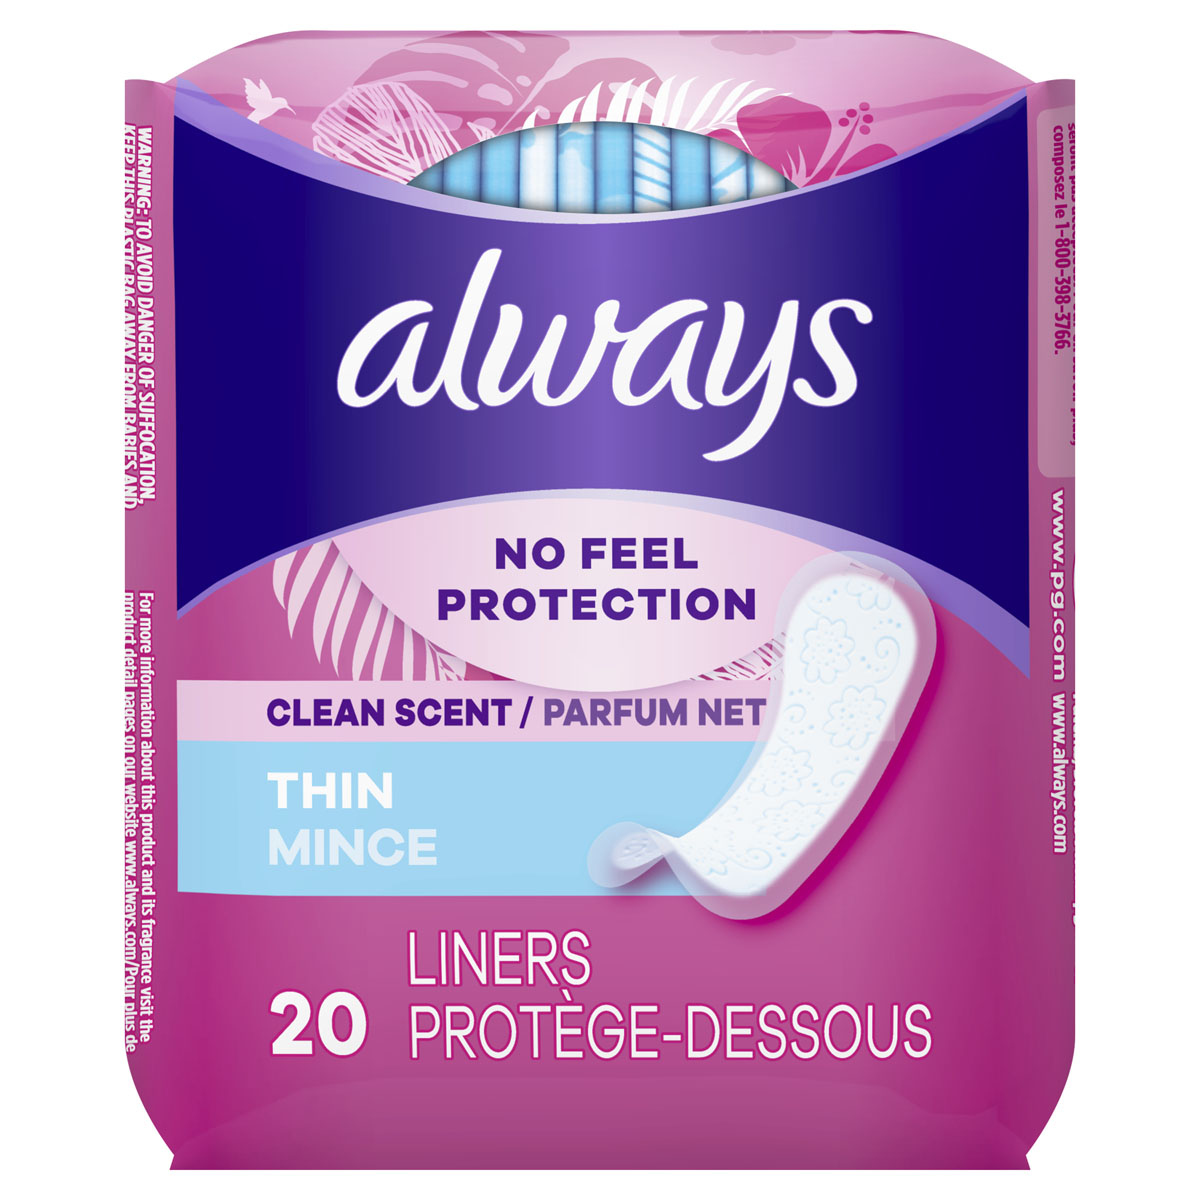 Always Daily Fresh Normal Wrapped Panty Liners, With Fresh Scent, 20 Count  - From Tuffins Craven Arms in Craven Arms